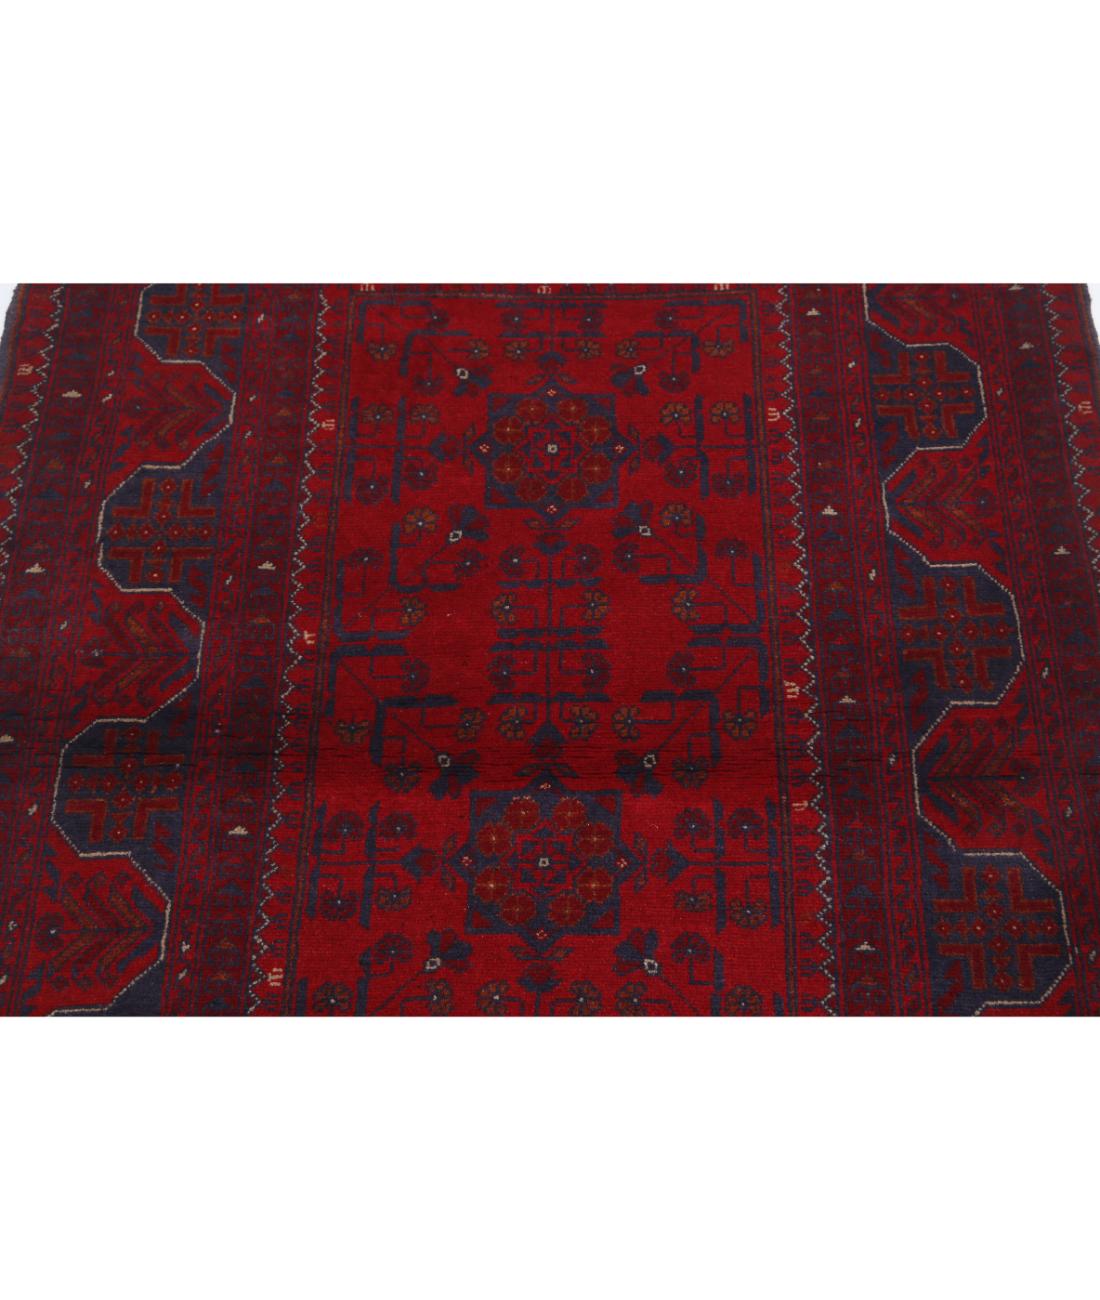 Afghan 3' 6" X 4' 10" Hand-Knotted Wool Rug 3' 6" X 4' 10" (107 X 147) / Red / Blue